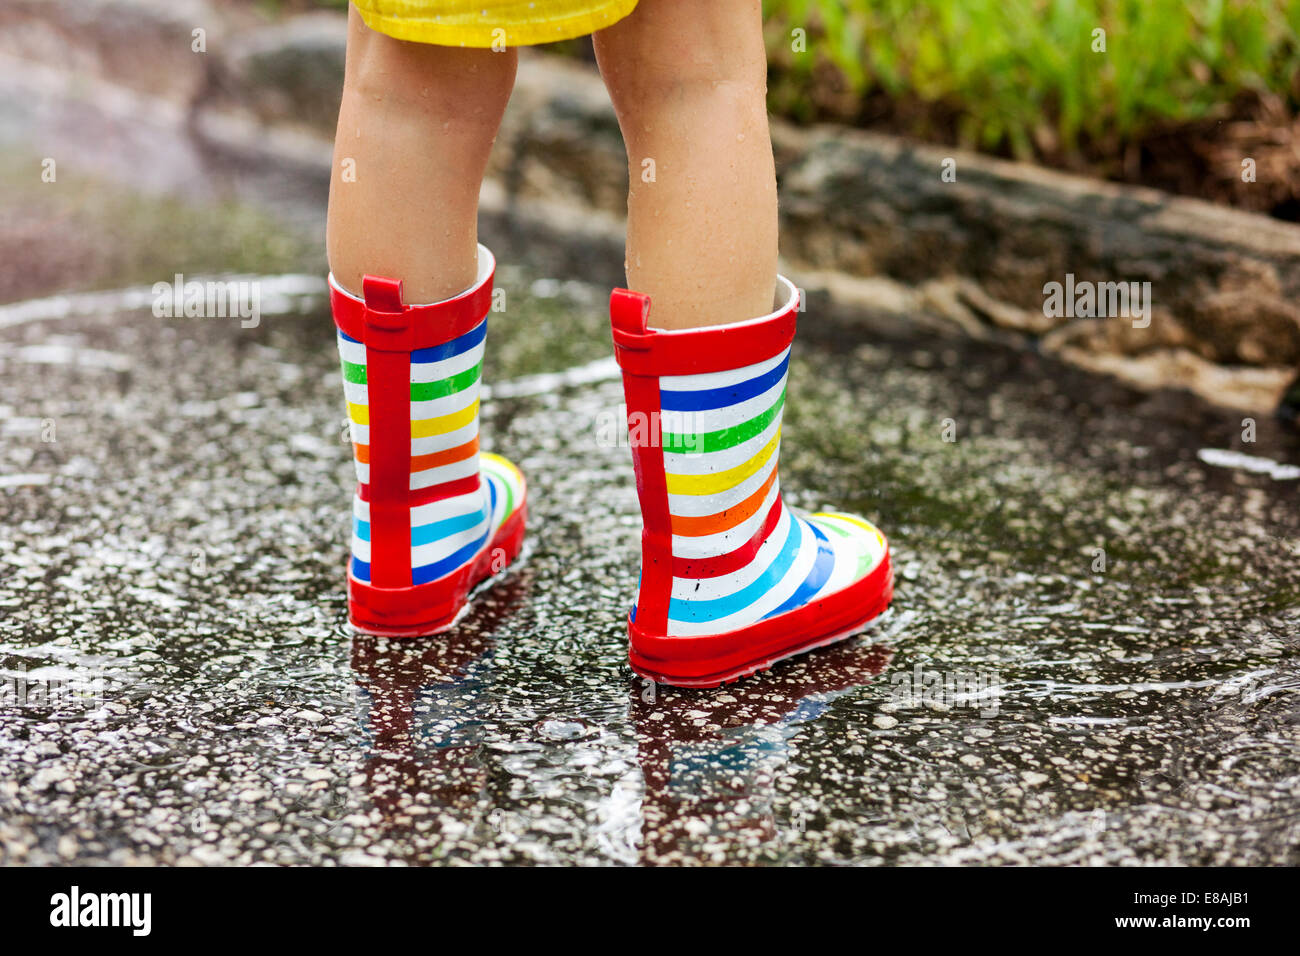 Legs of girl wearing rubber boots standing in rain puddle Stock Photo